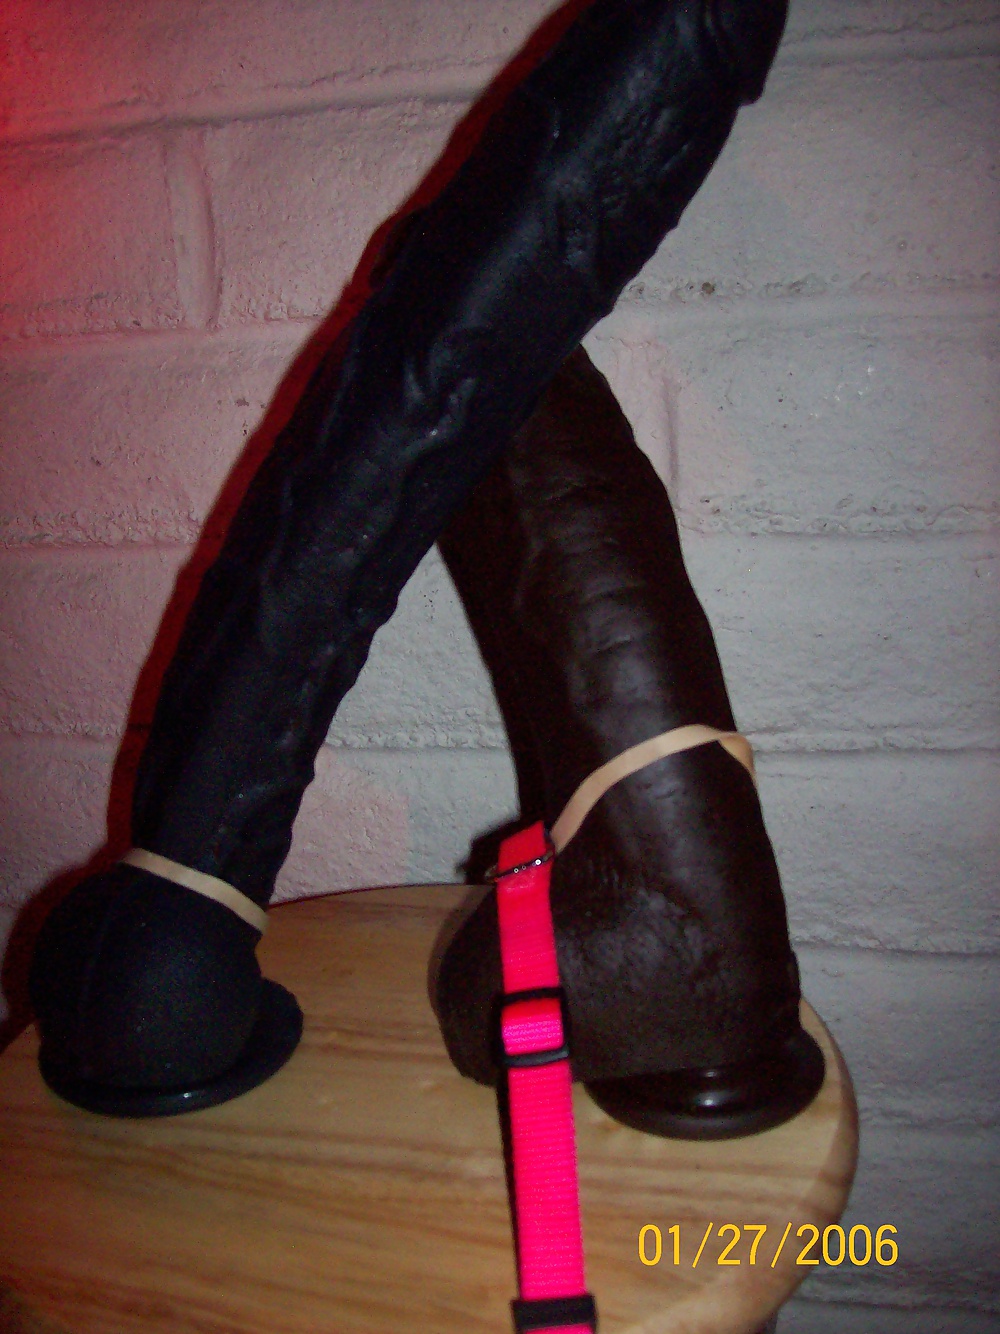 Tgirl jill's kinky accessories used for bbc training.
 #24341888